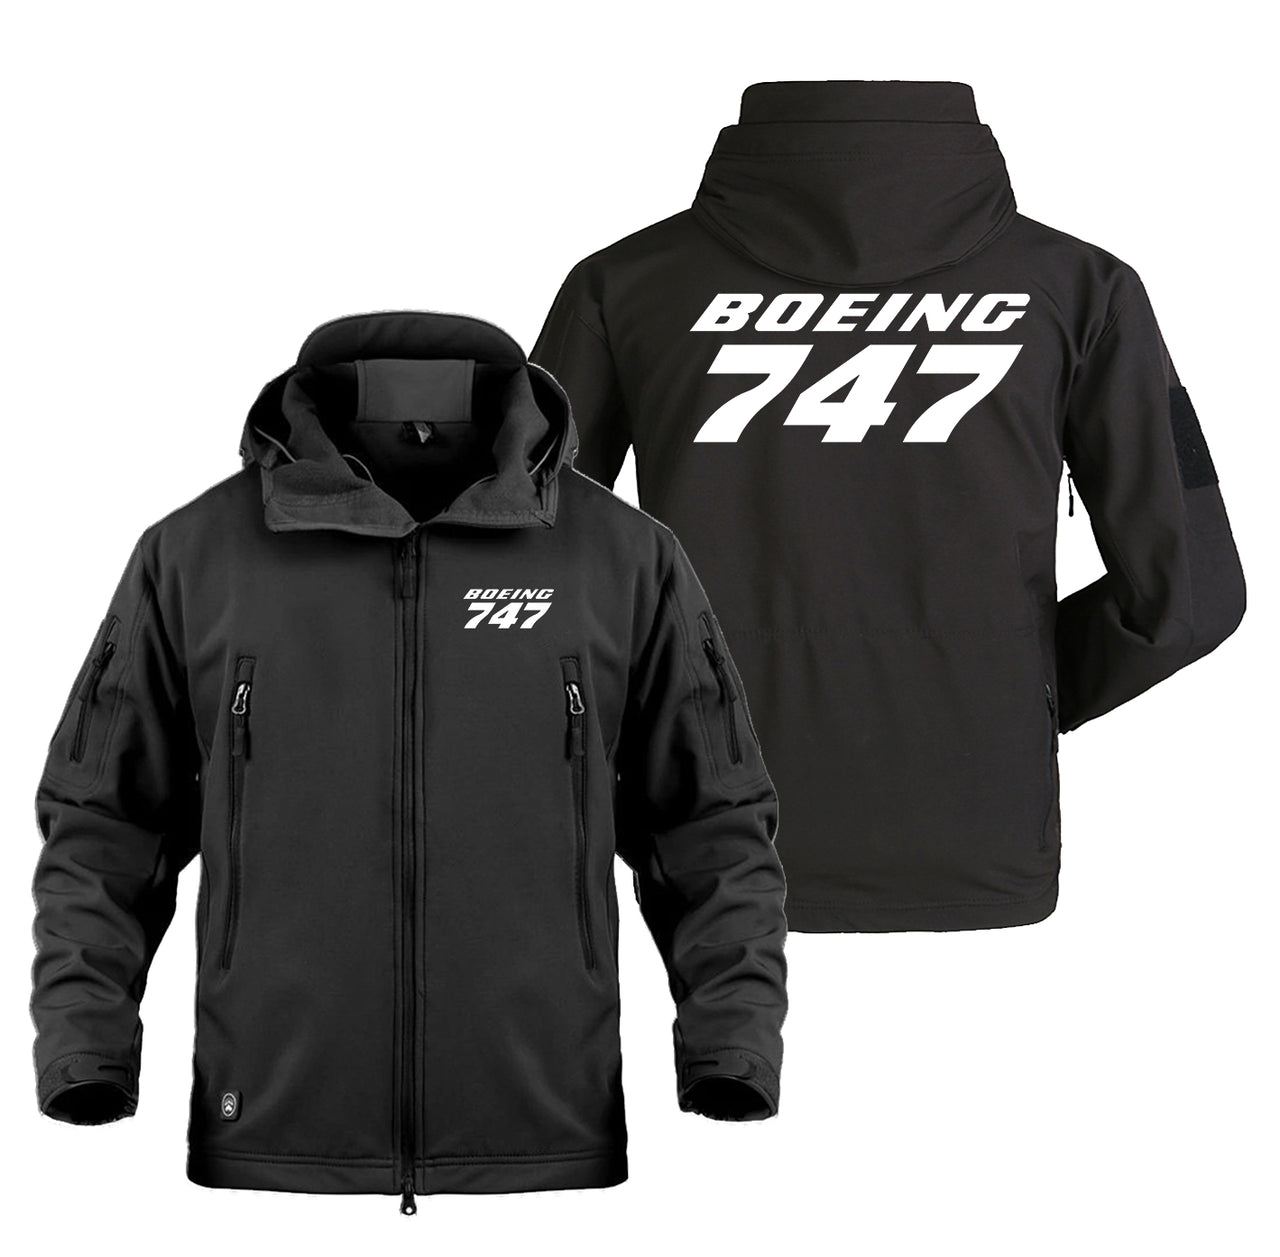 Boeing 747 & Text Designed Military Jackets (Customizable)